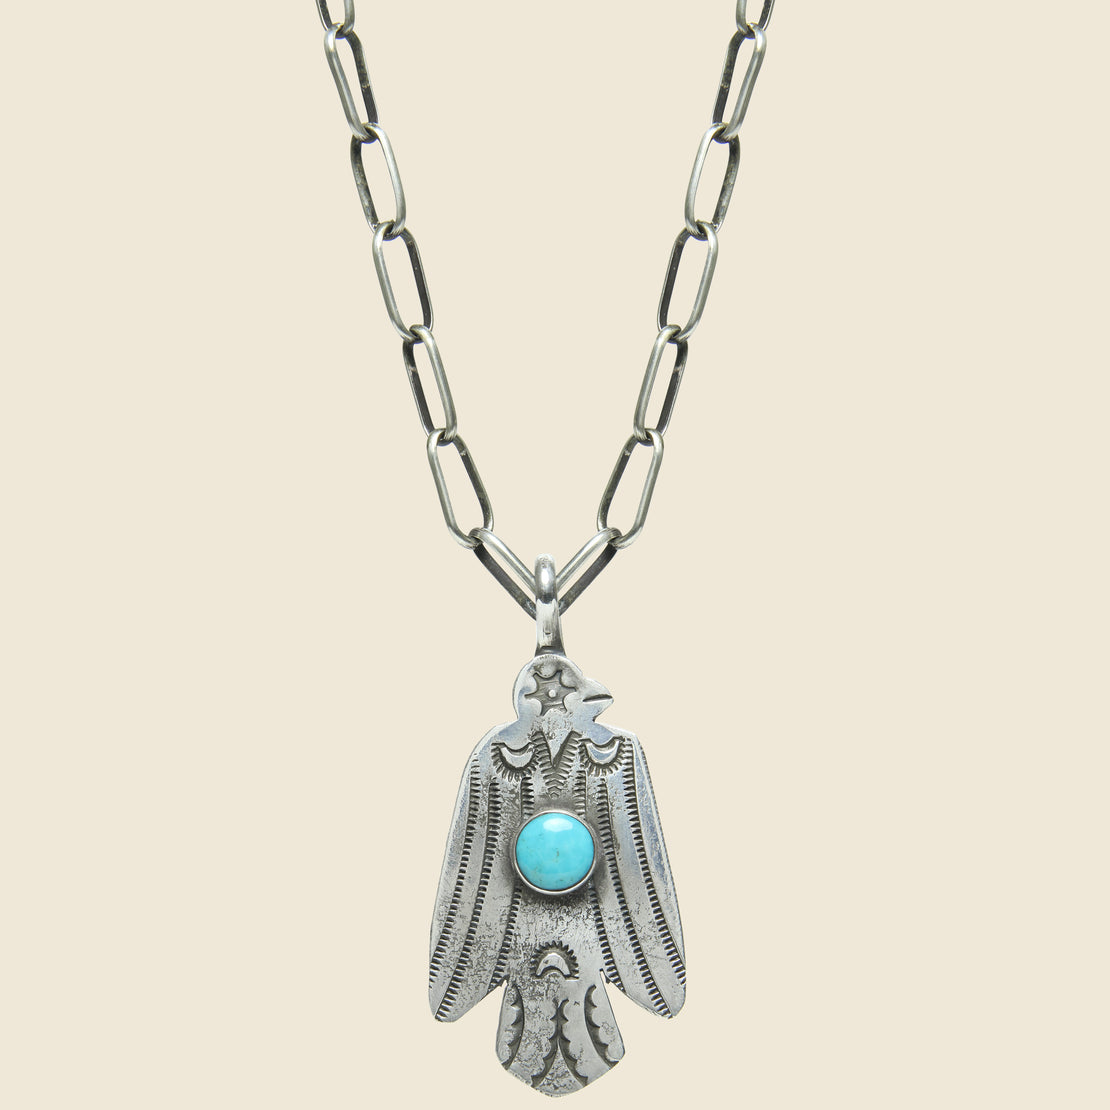 Smith Bros. Trading Co. Star Eye Thunderbird Pendant Necklace - Sterling/Turquoise